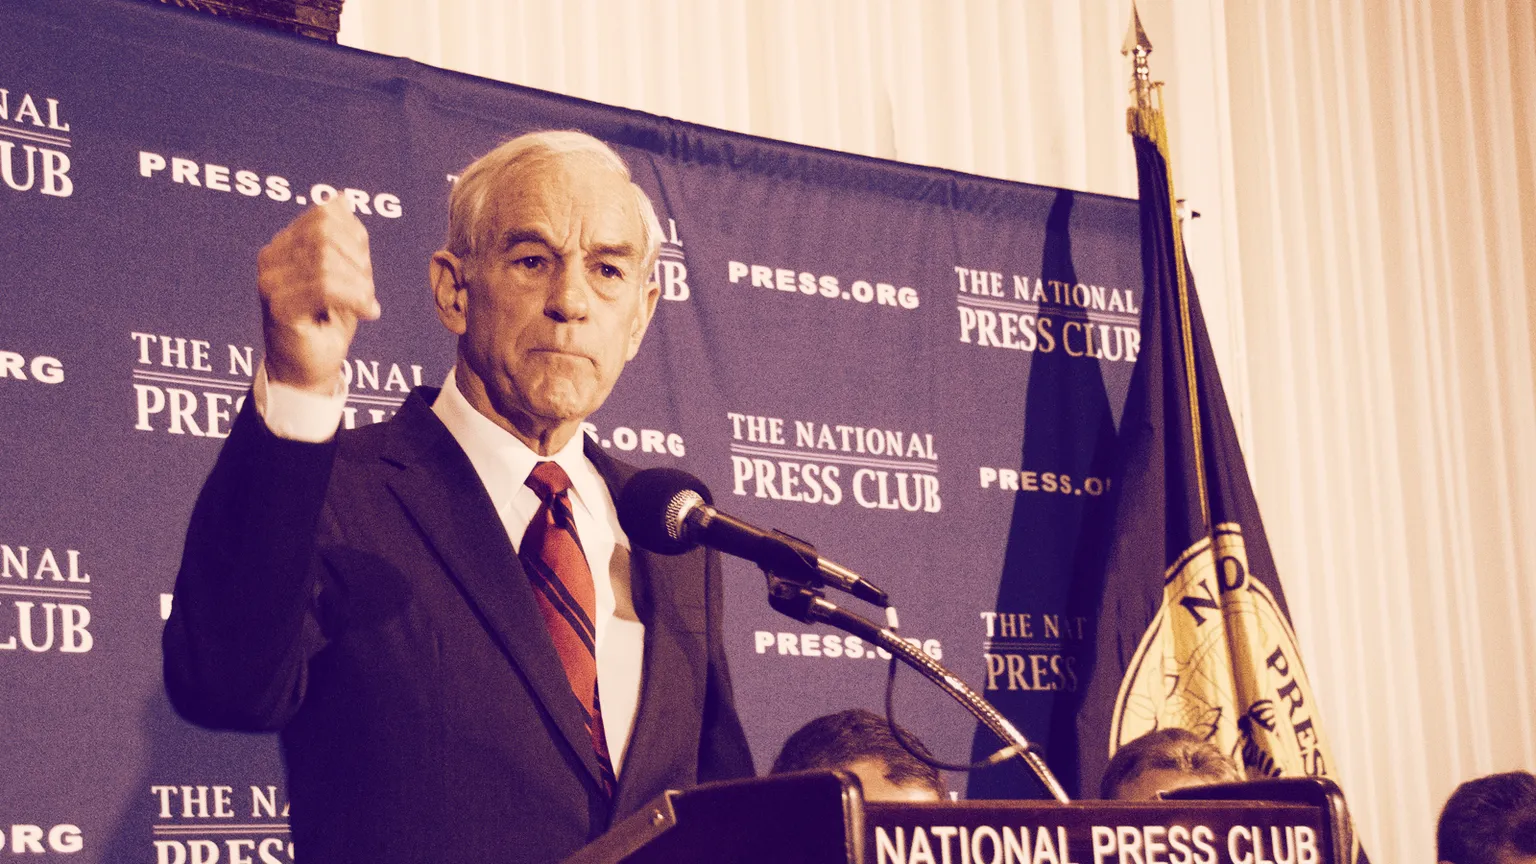 Ron Paul, candidate for the Republican Presidential nomination, speaks to a luncheon at the National Press Club, October 5, 2011 in Washington, DC. Image: Shutterstock